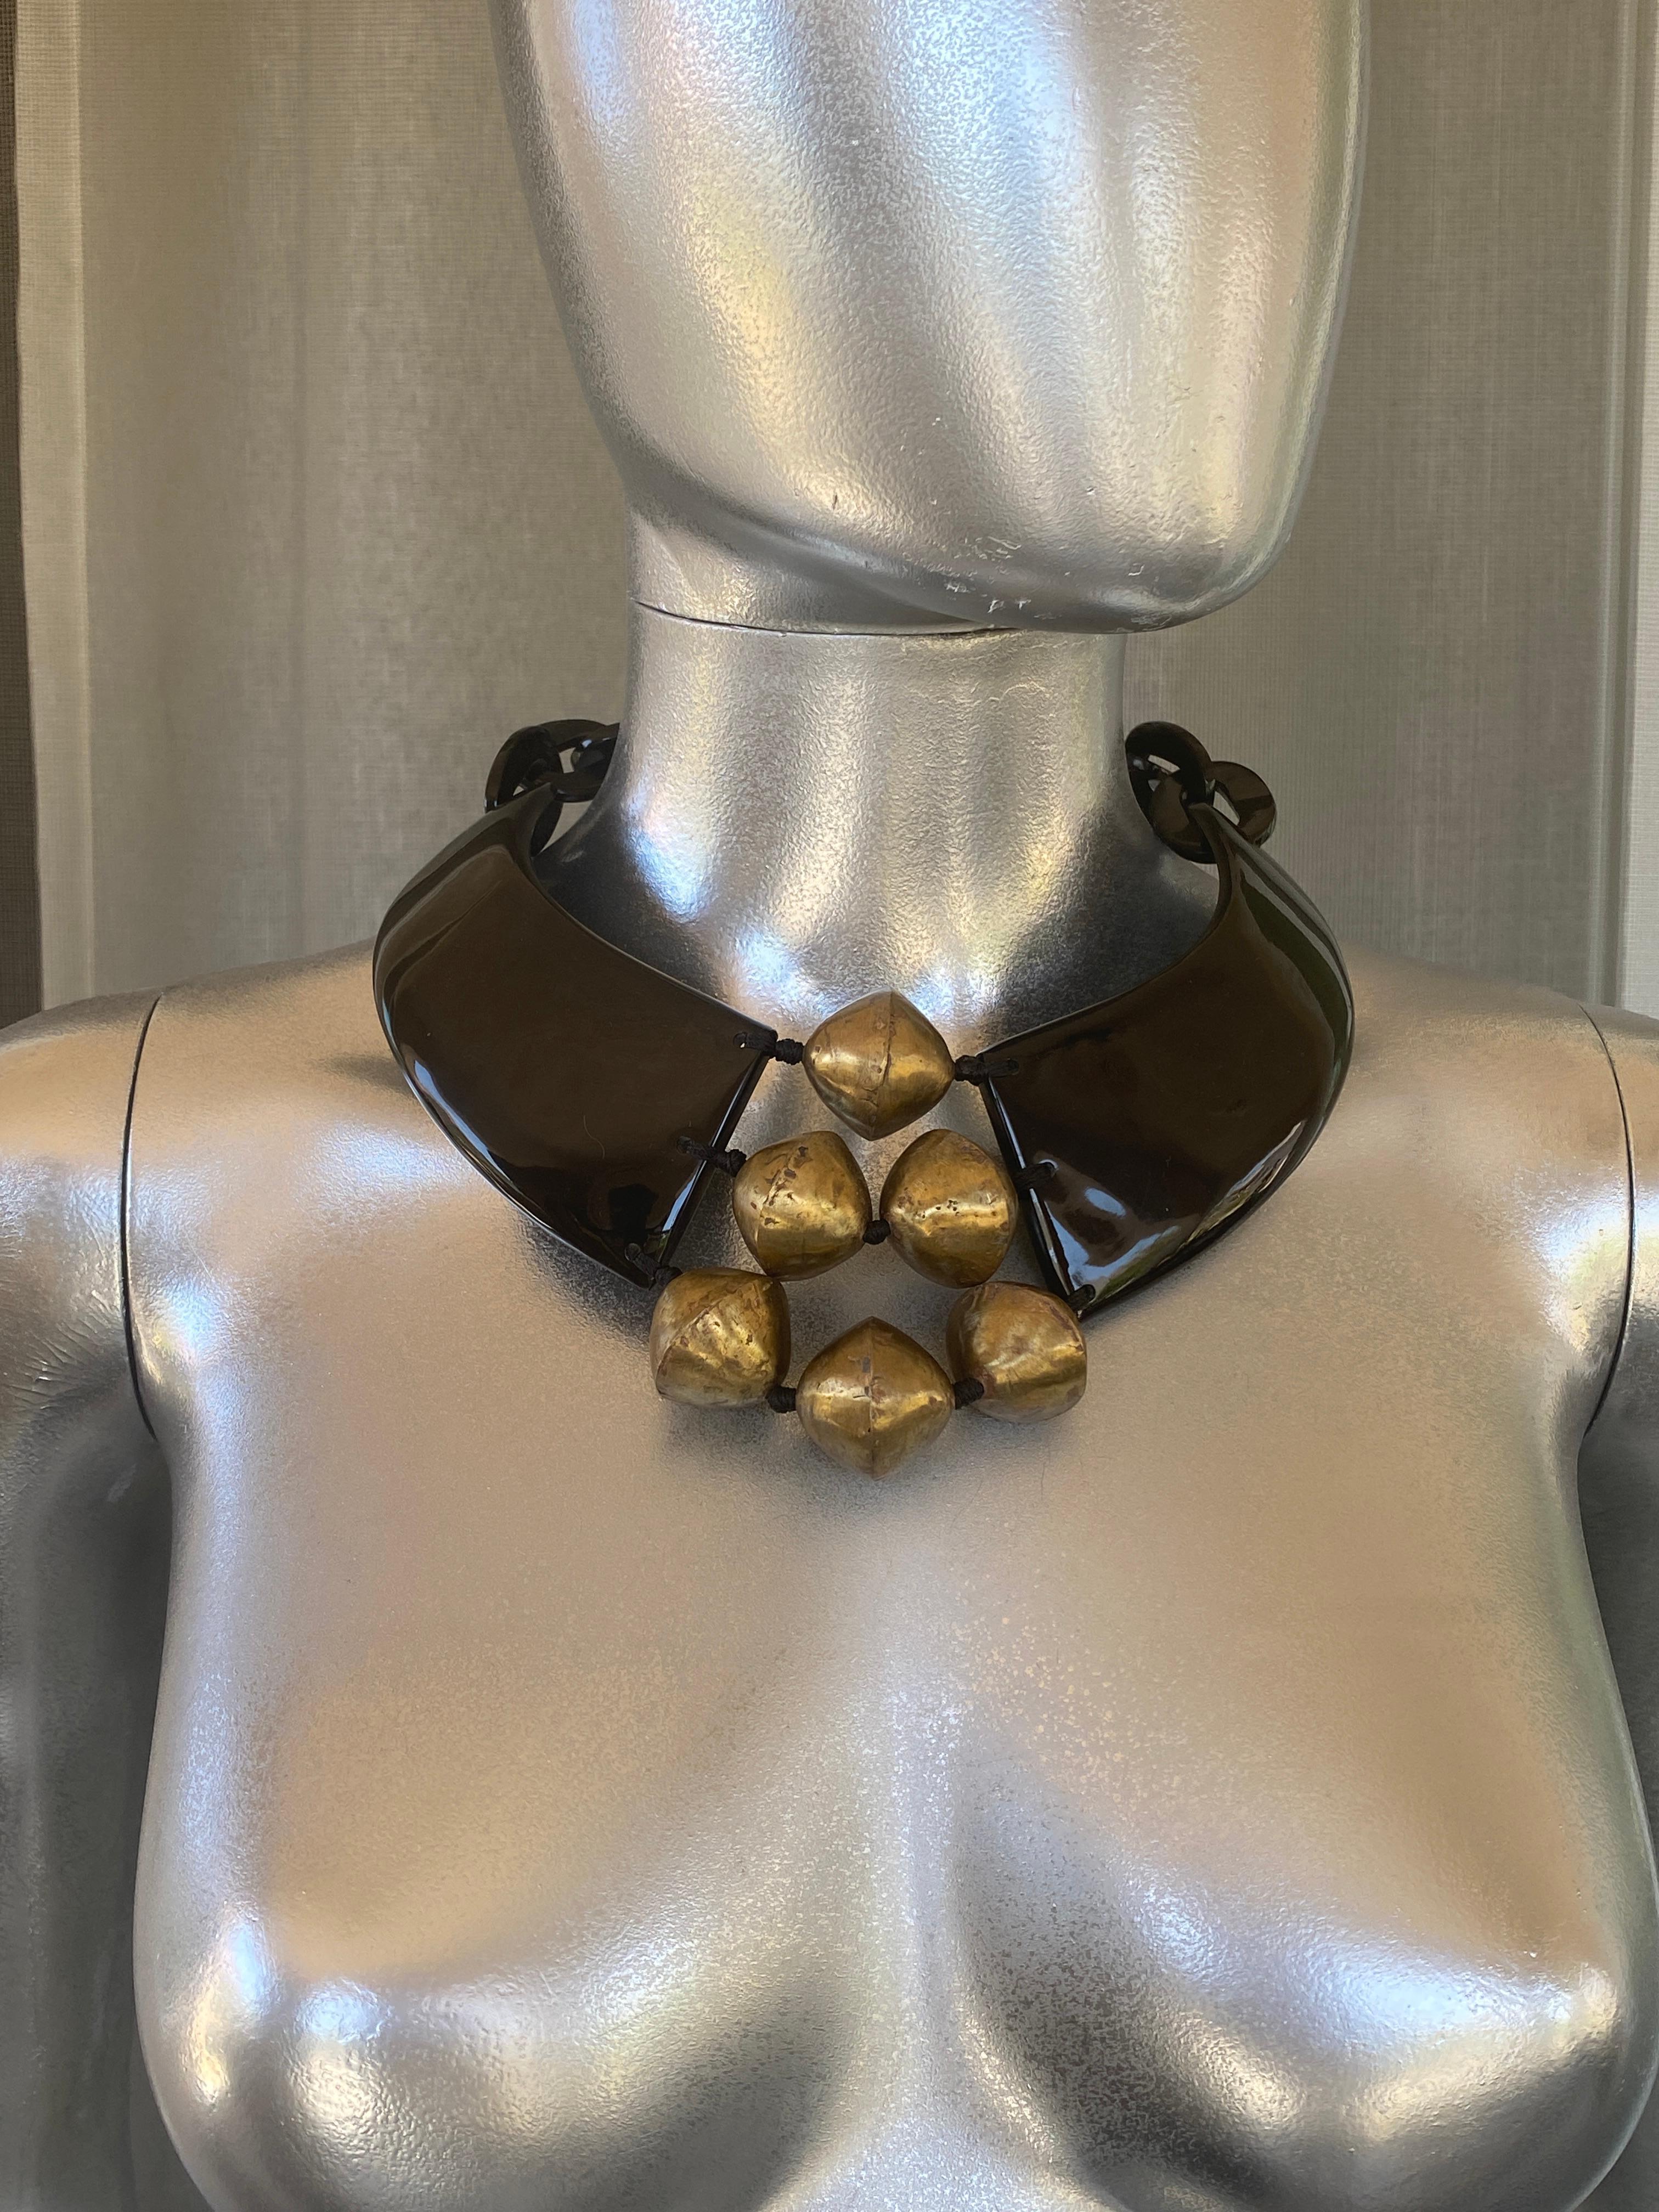 This very special necklace came from the Simons estate in Rancho Mirage, a socialite, philanthropist and a amazing Fashionista with impeccable taste. Purchased at Neiman Marcus in Beverly Hills, this statemate necklace has a modern African/Ethnic